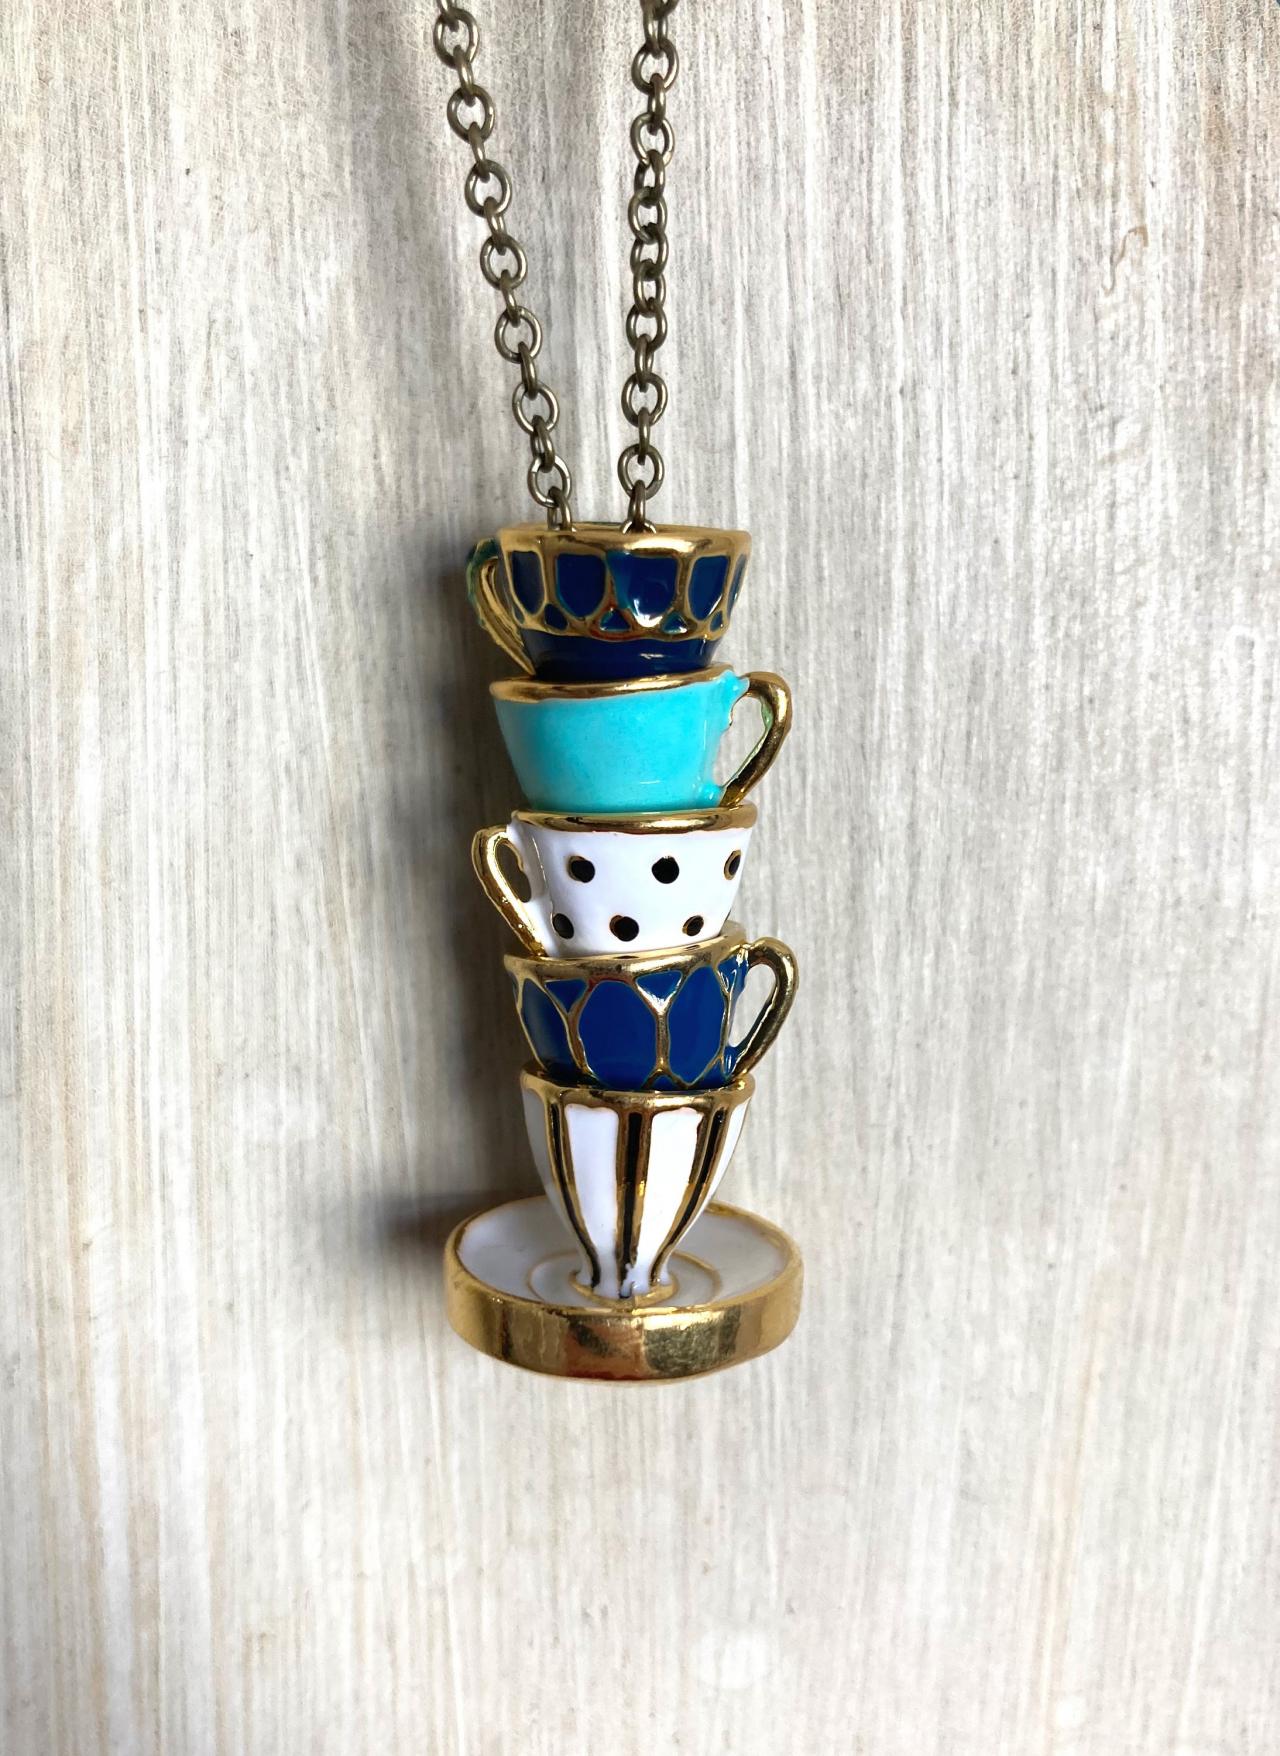 Whimsical stack of teacups necklace with brass chain, Selma Dreams jewelry